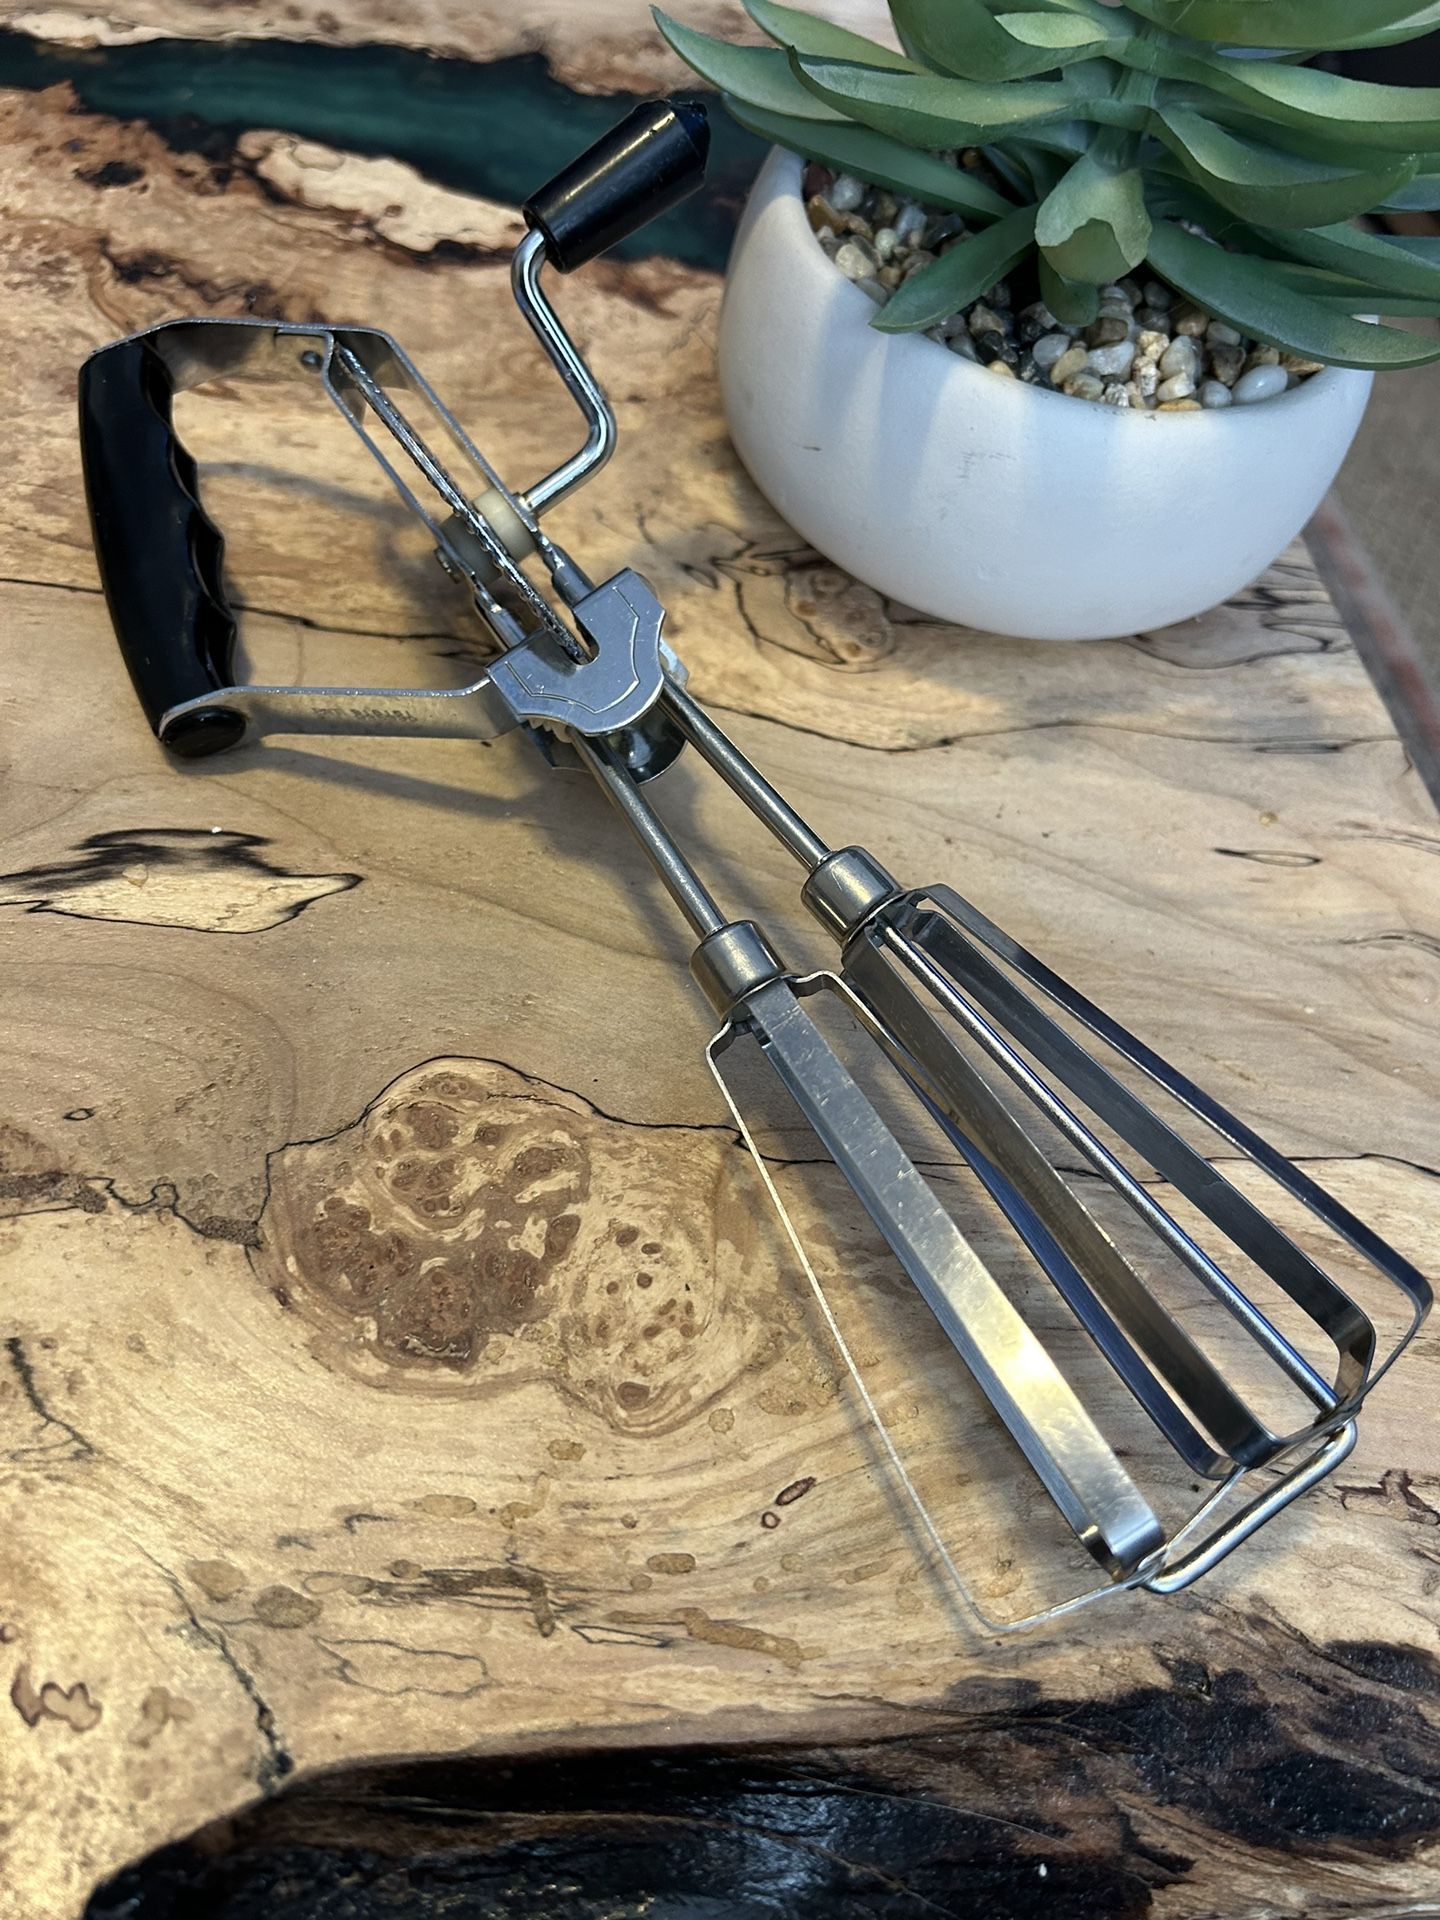 Vintage Egg Beaters/Mixer- Stainless Steel- Like new!